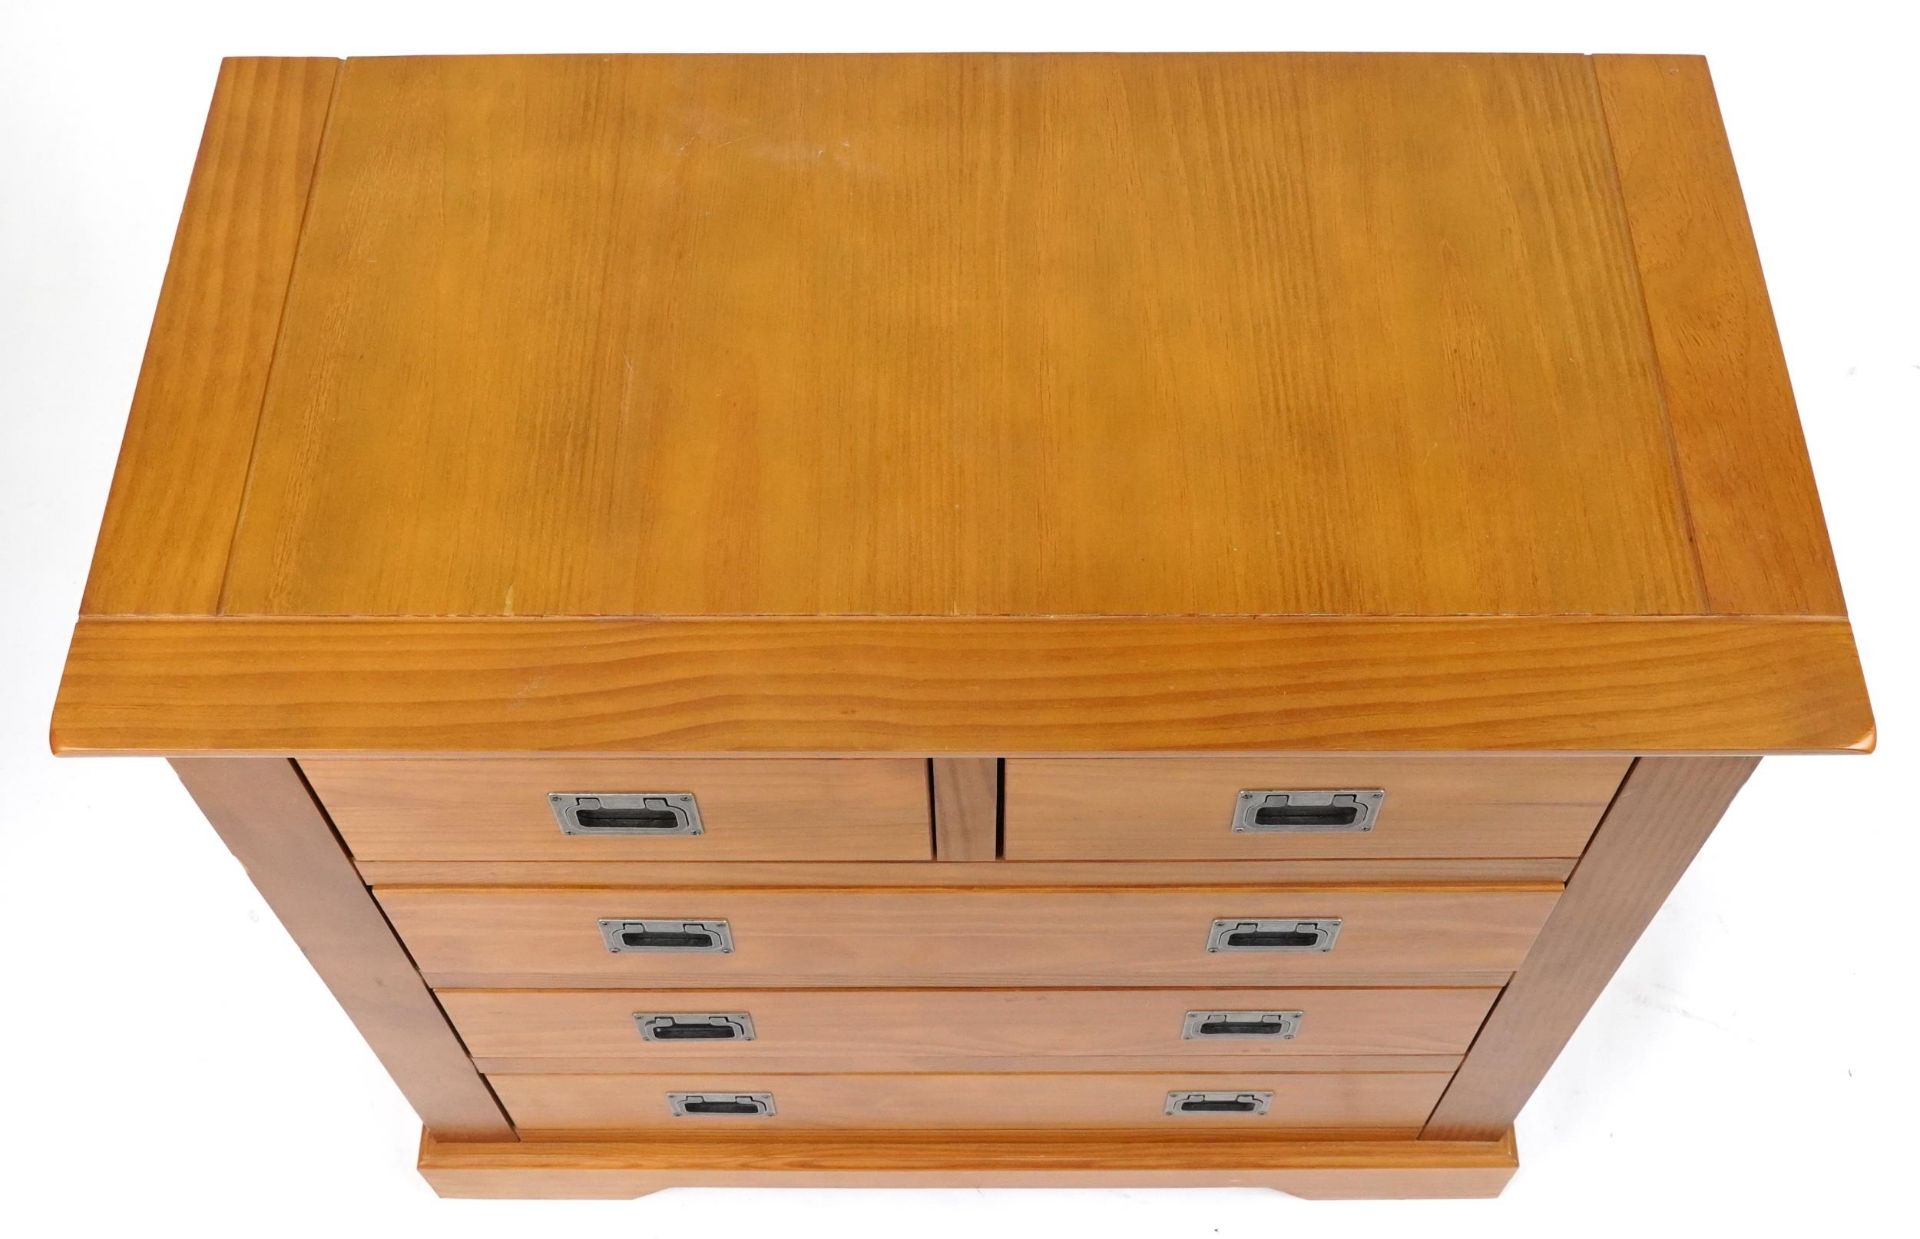 Contemporary light oak five drawer chest with inset silvered metal handles, 79cm H x 84cm W x 44cm D - Image 3 of 4